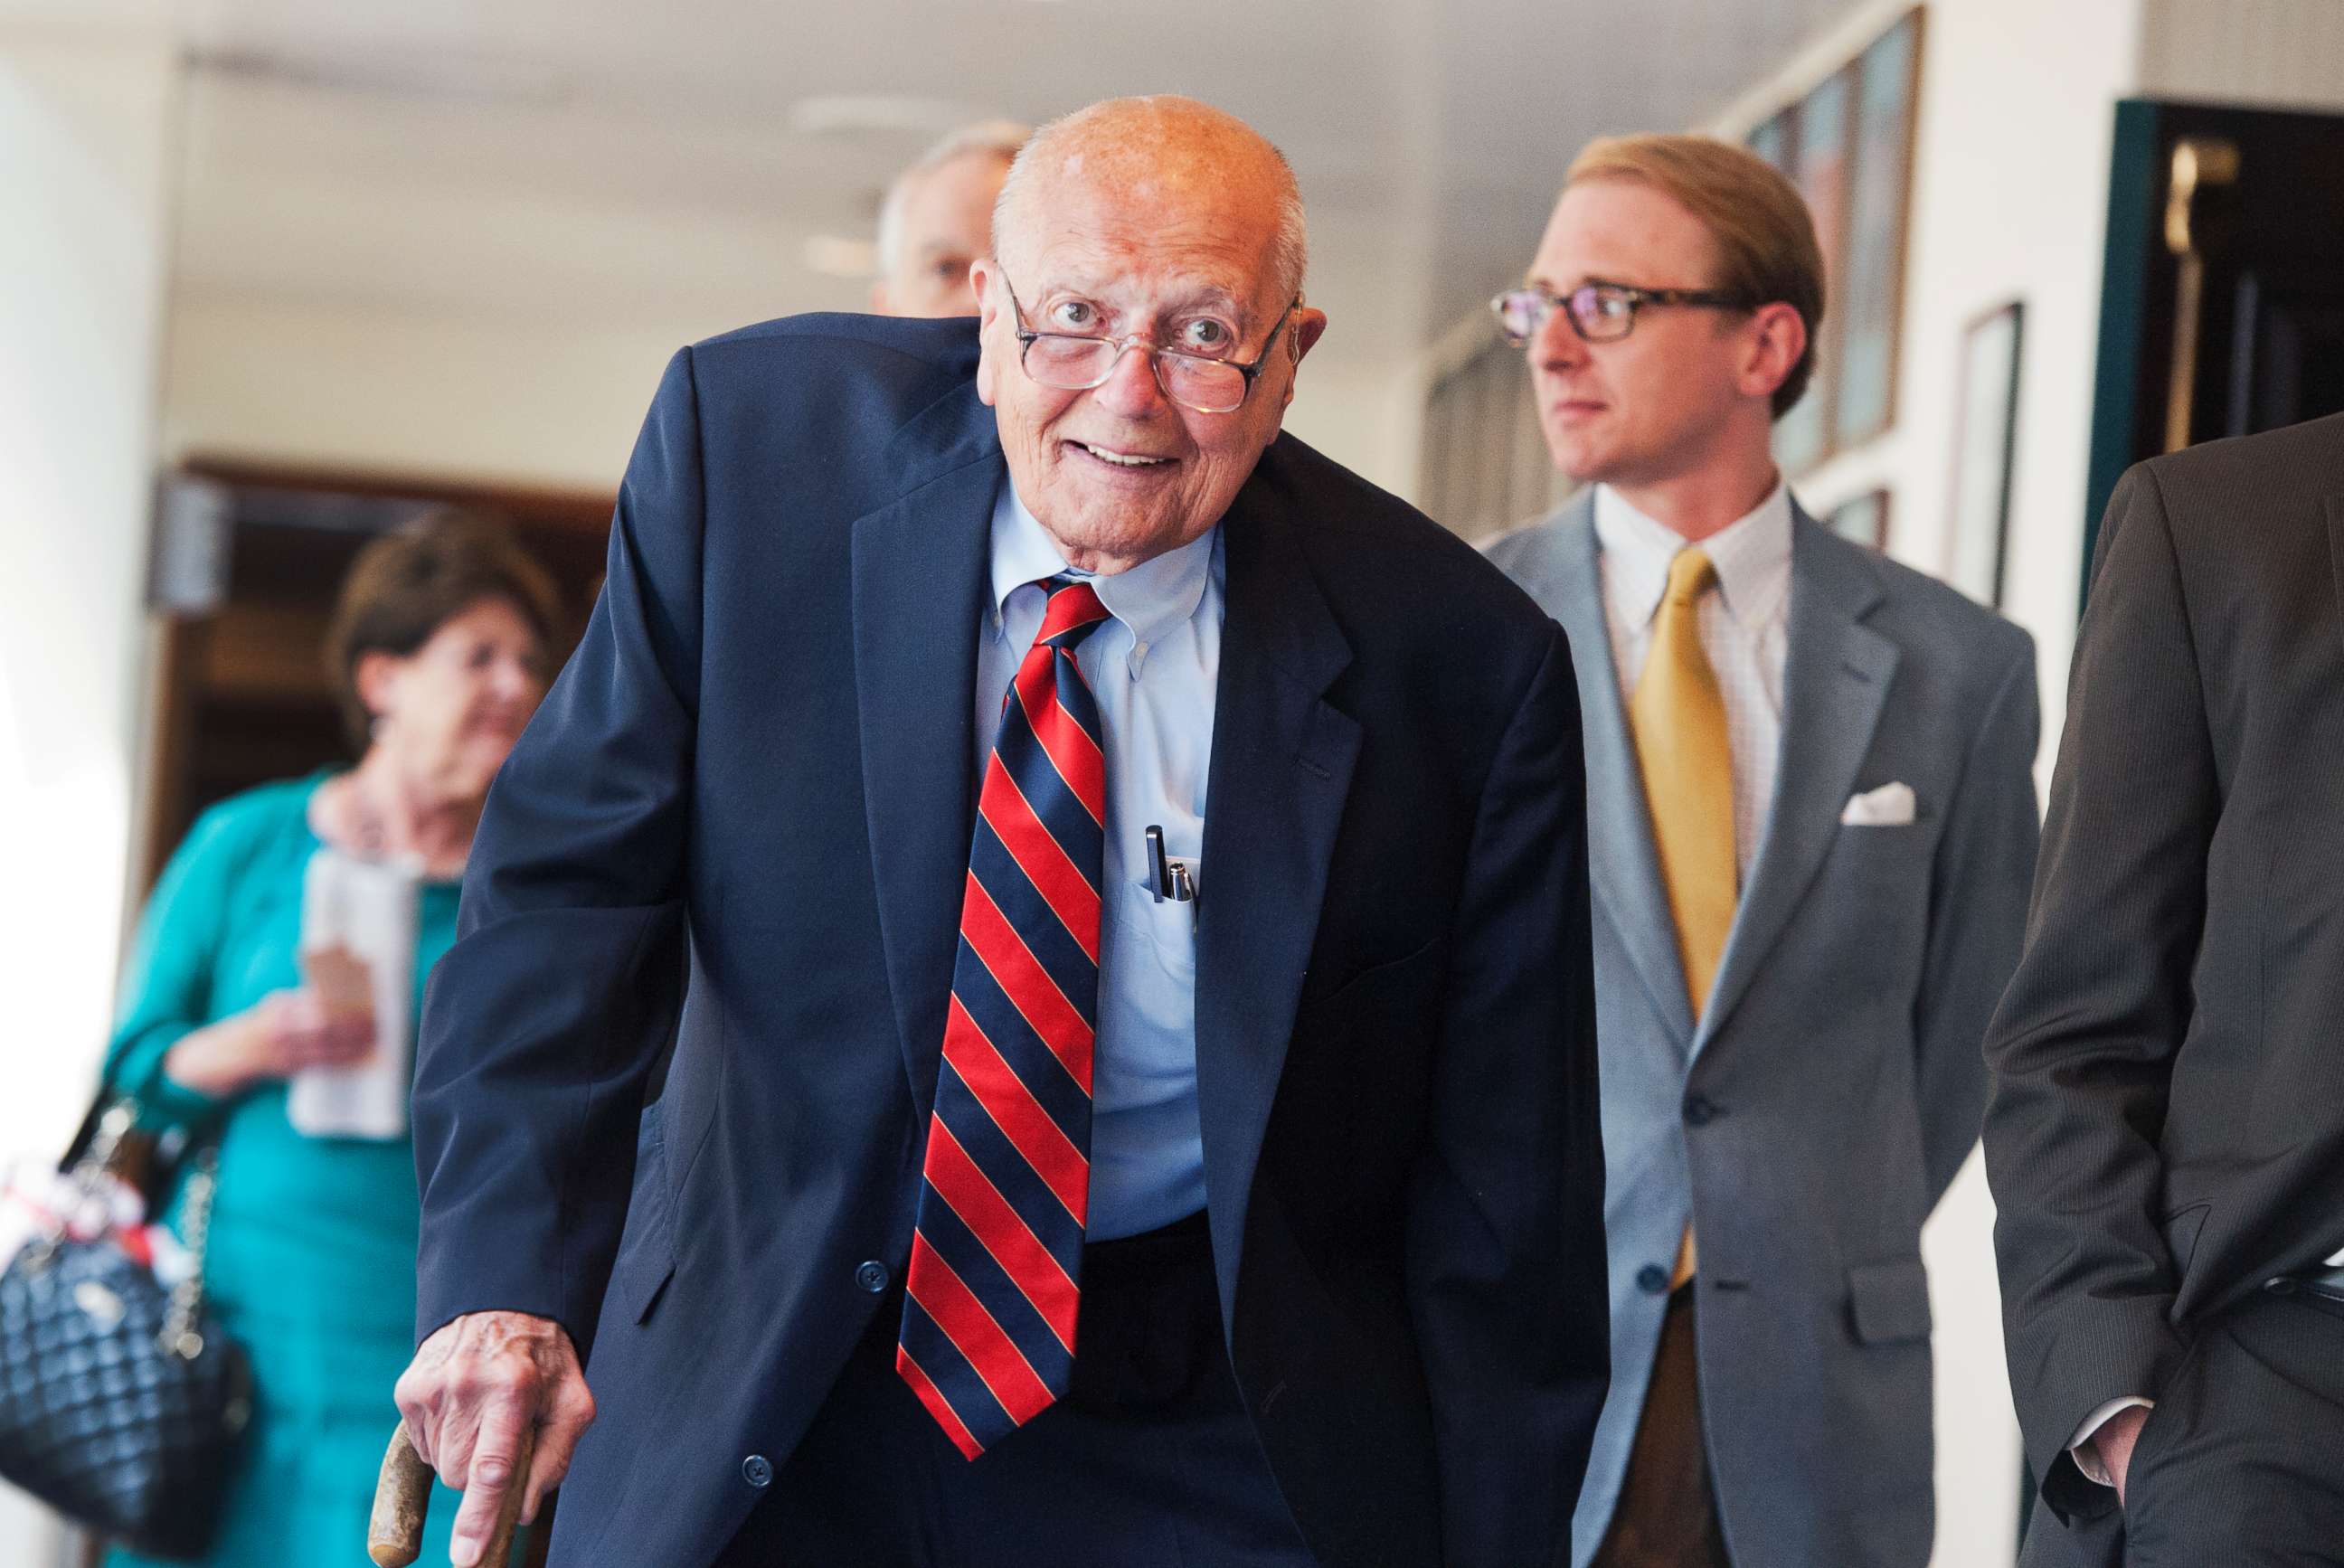 PHOTO: Rep. John Dingell, D-Mich., arrives at the National Press Club to speak at a luncheon, June 27, 2014.